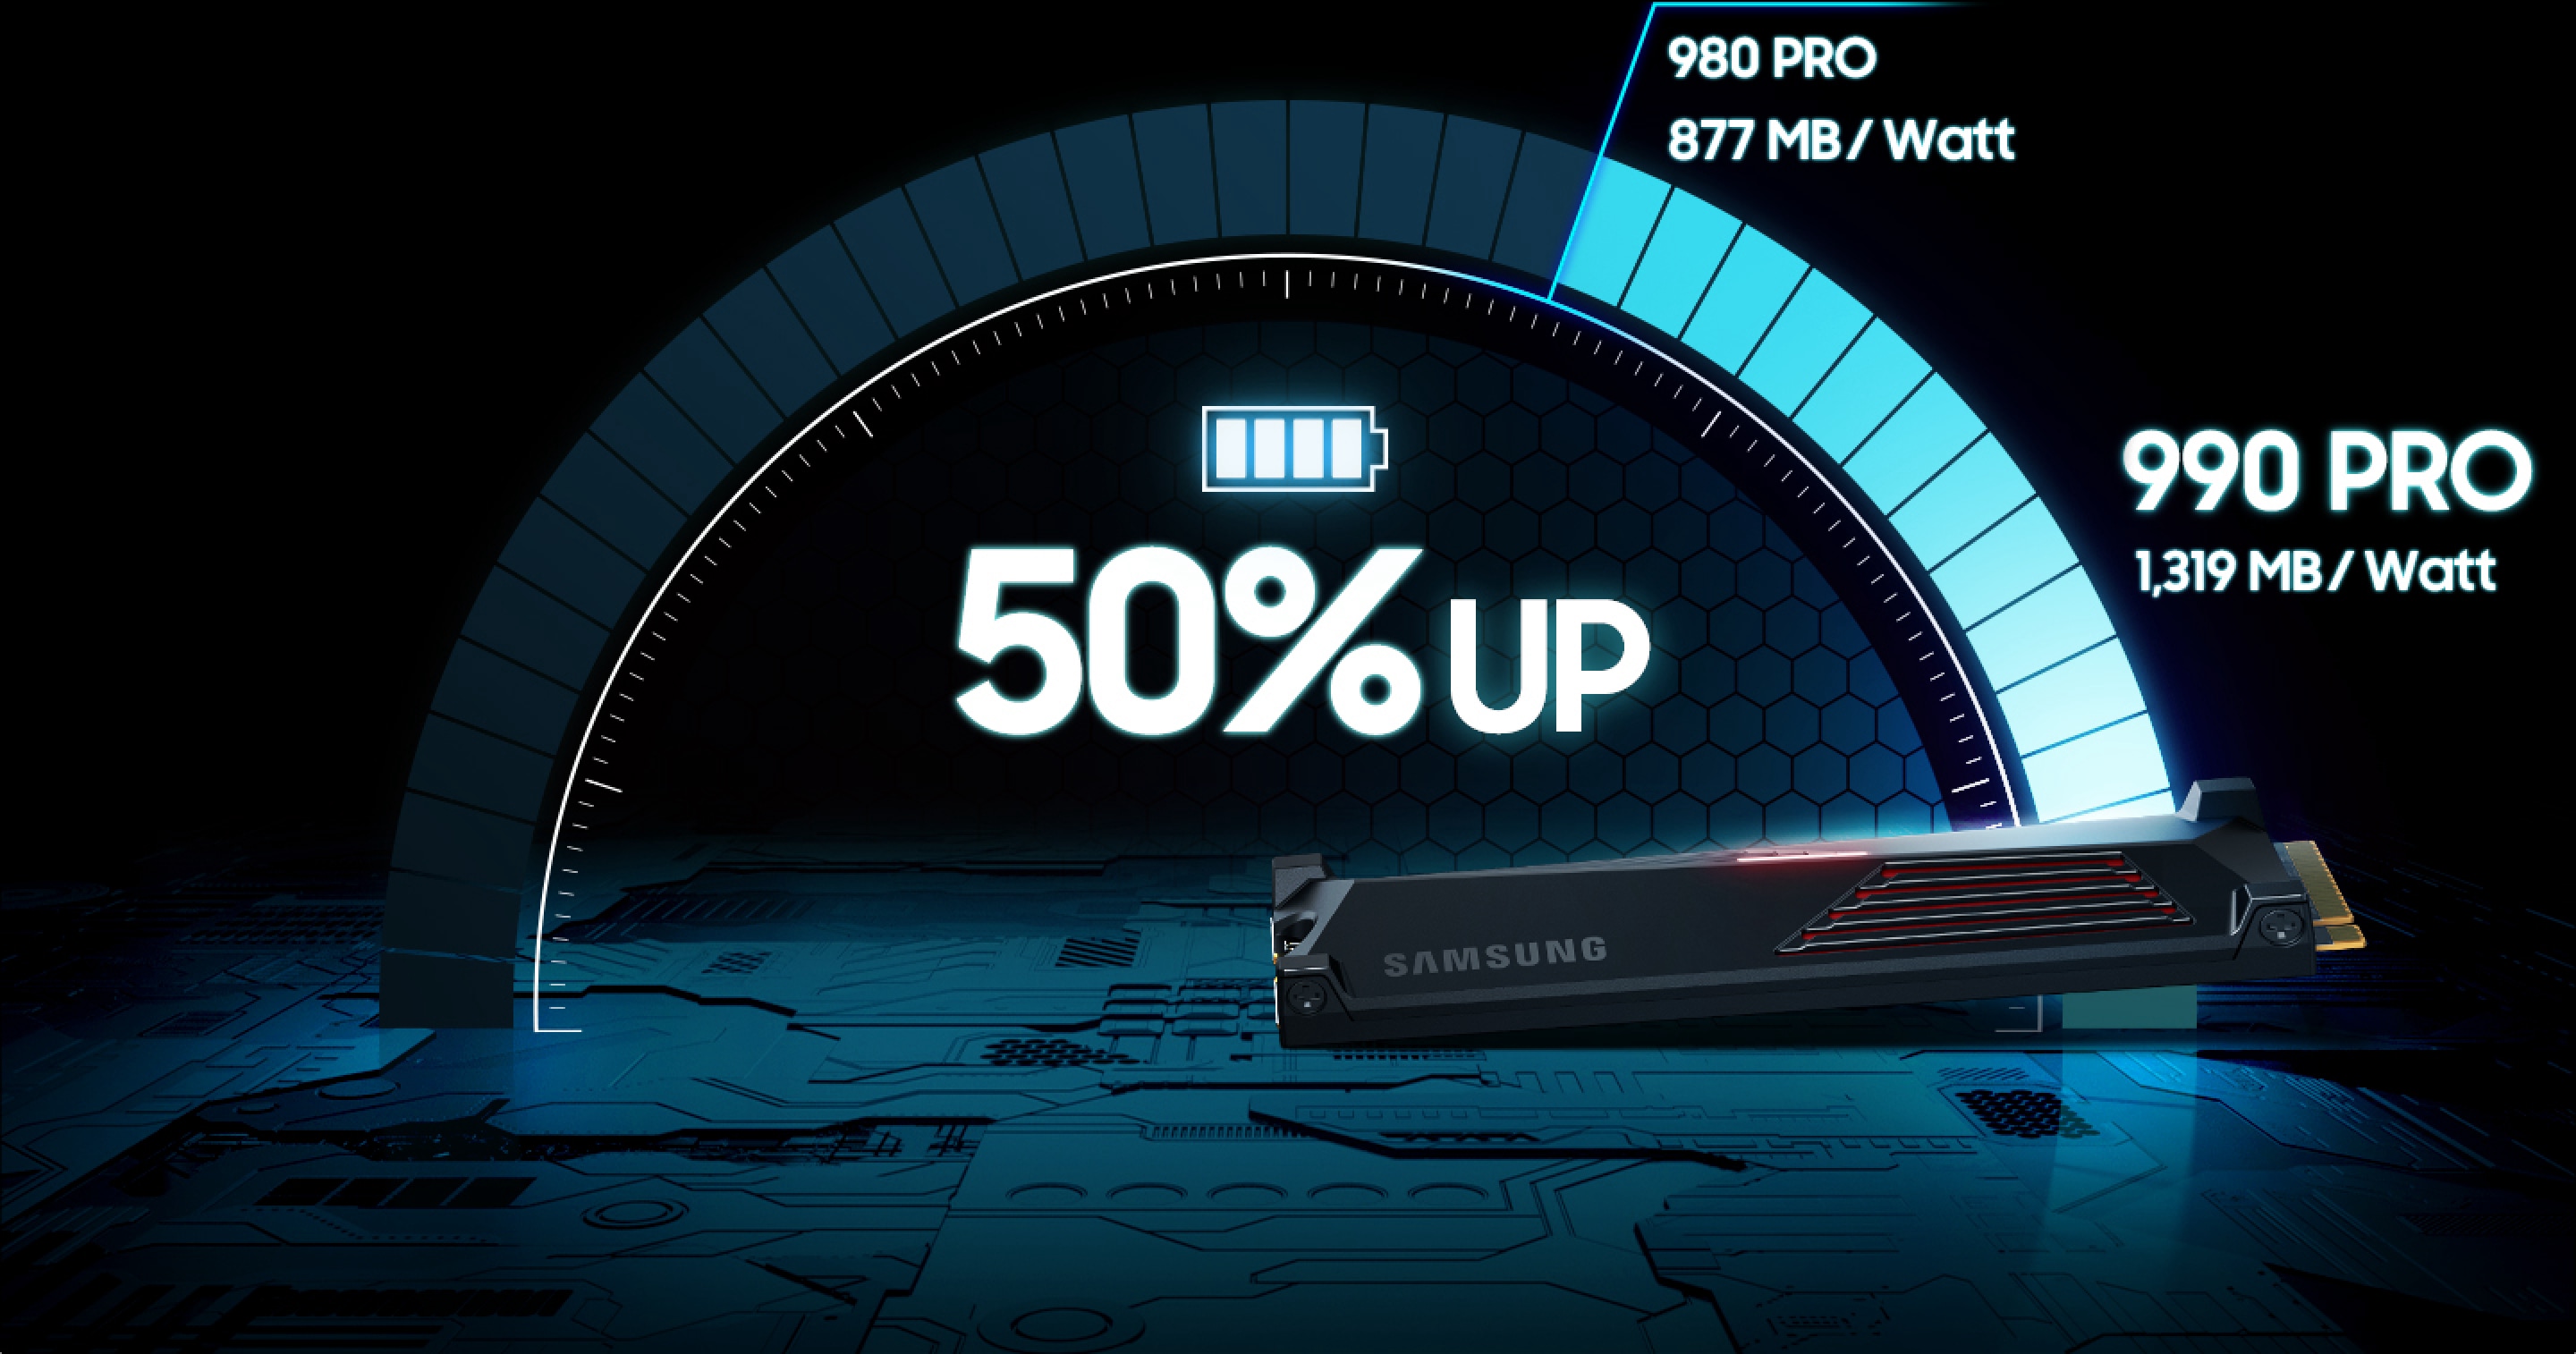 Samsung Semiconductor 990 PRO with heatsink uses less power with over 50% improved performance per Watt over 980 PRO.